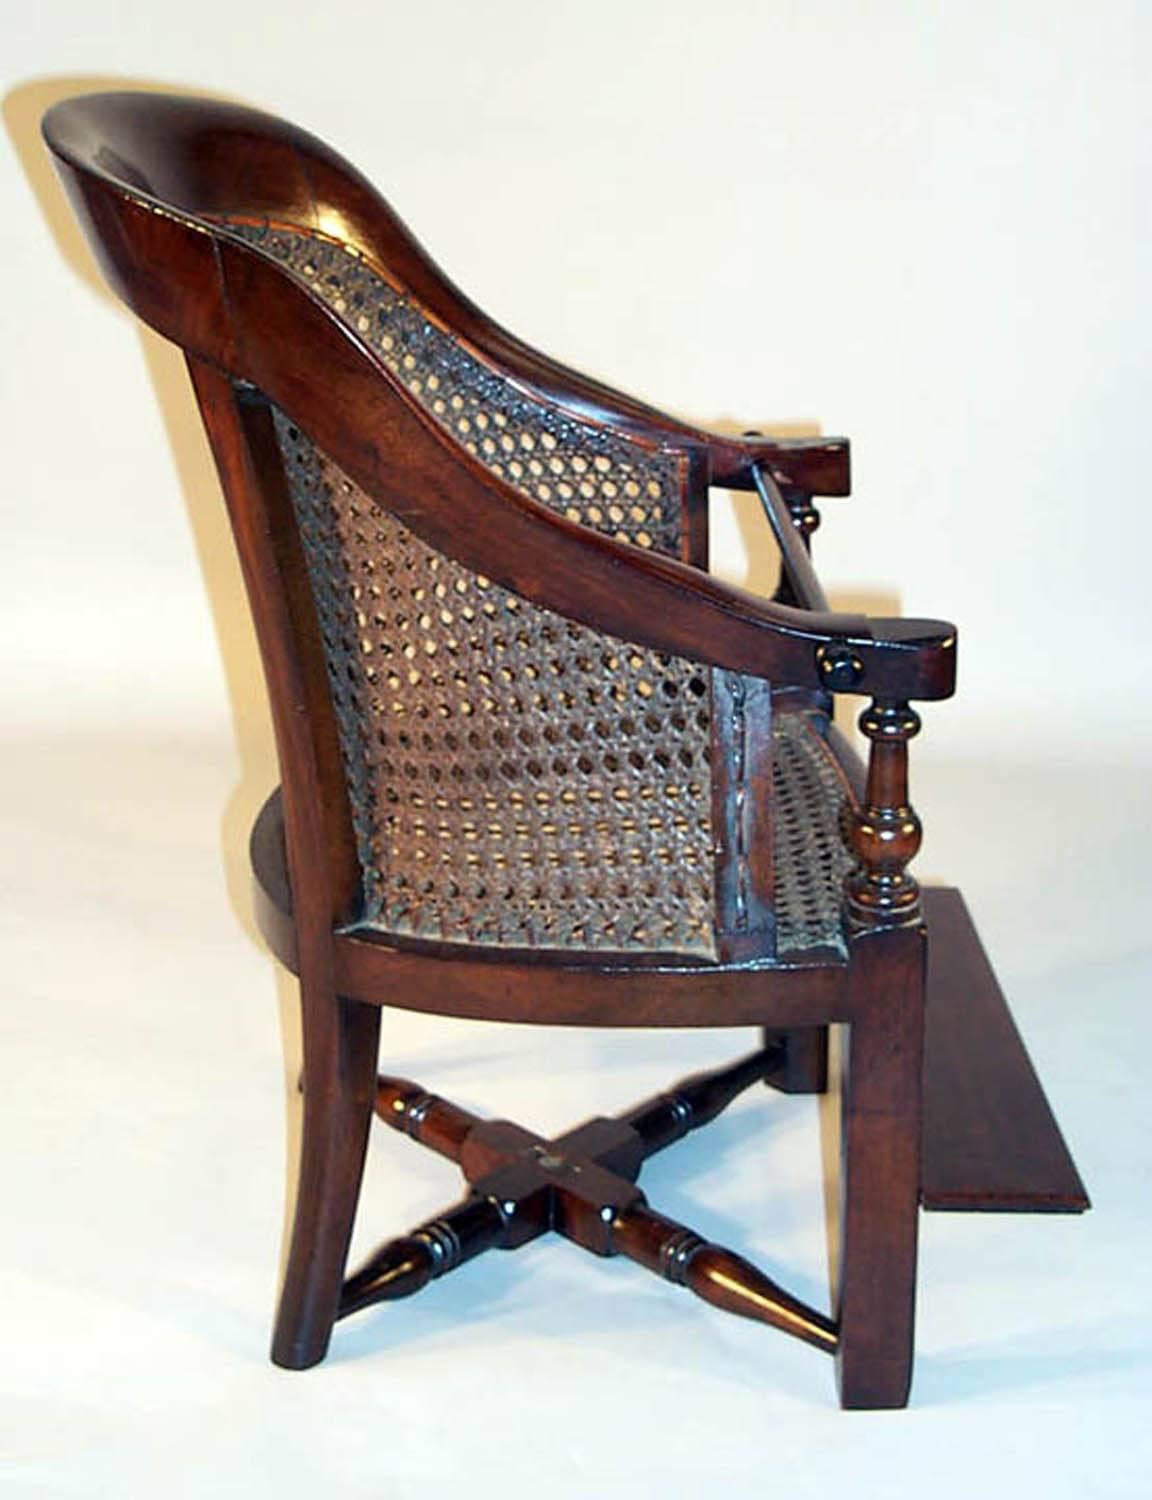 Cane 19th Century English Regency Style Child's High Chair For Sale